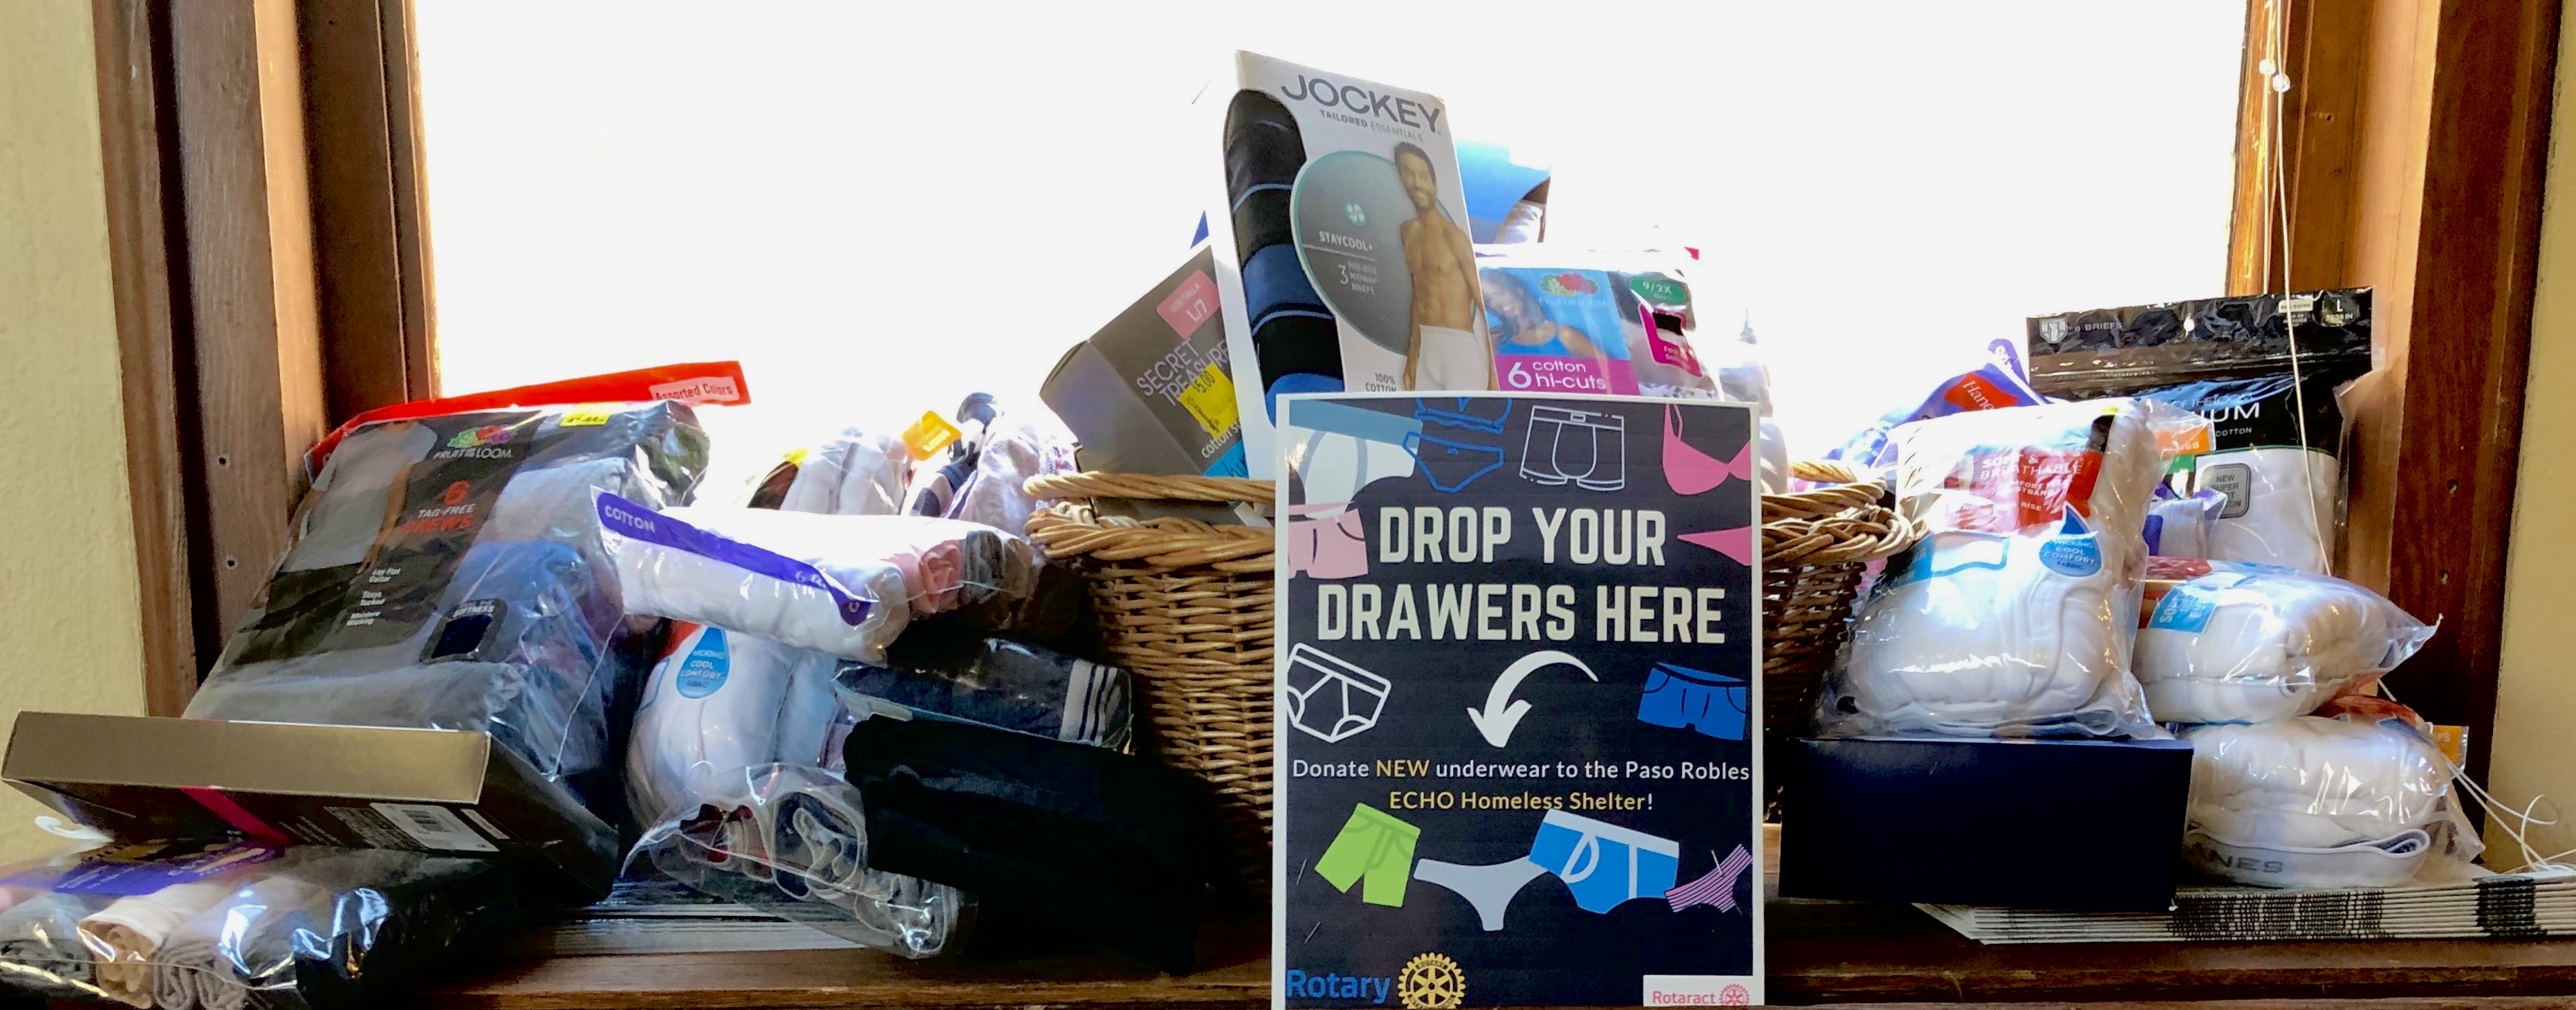 drawers donation drop off at the chamber